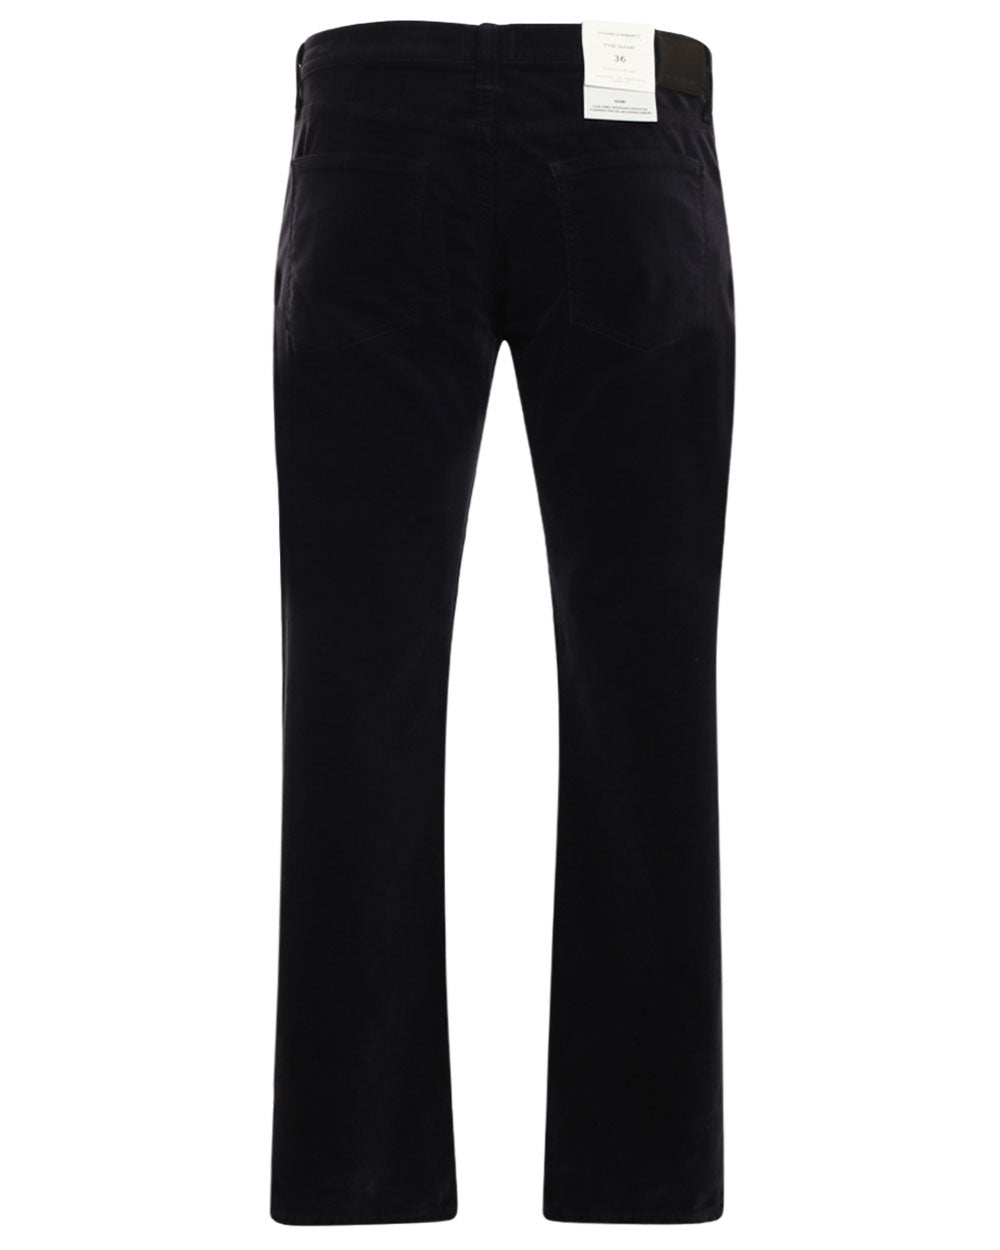 Gage Stretch Corduroy Pant in Night Sky